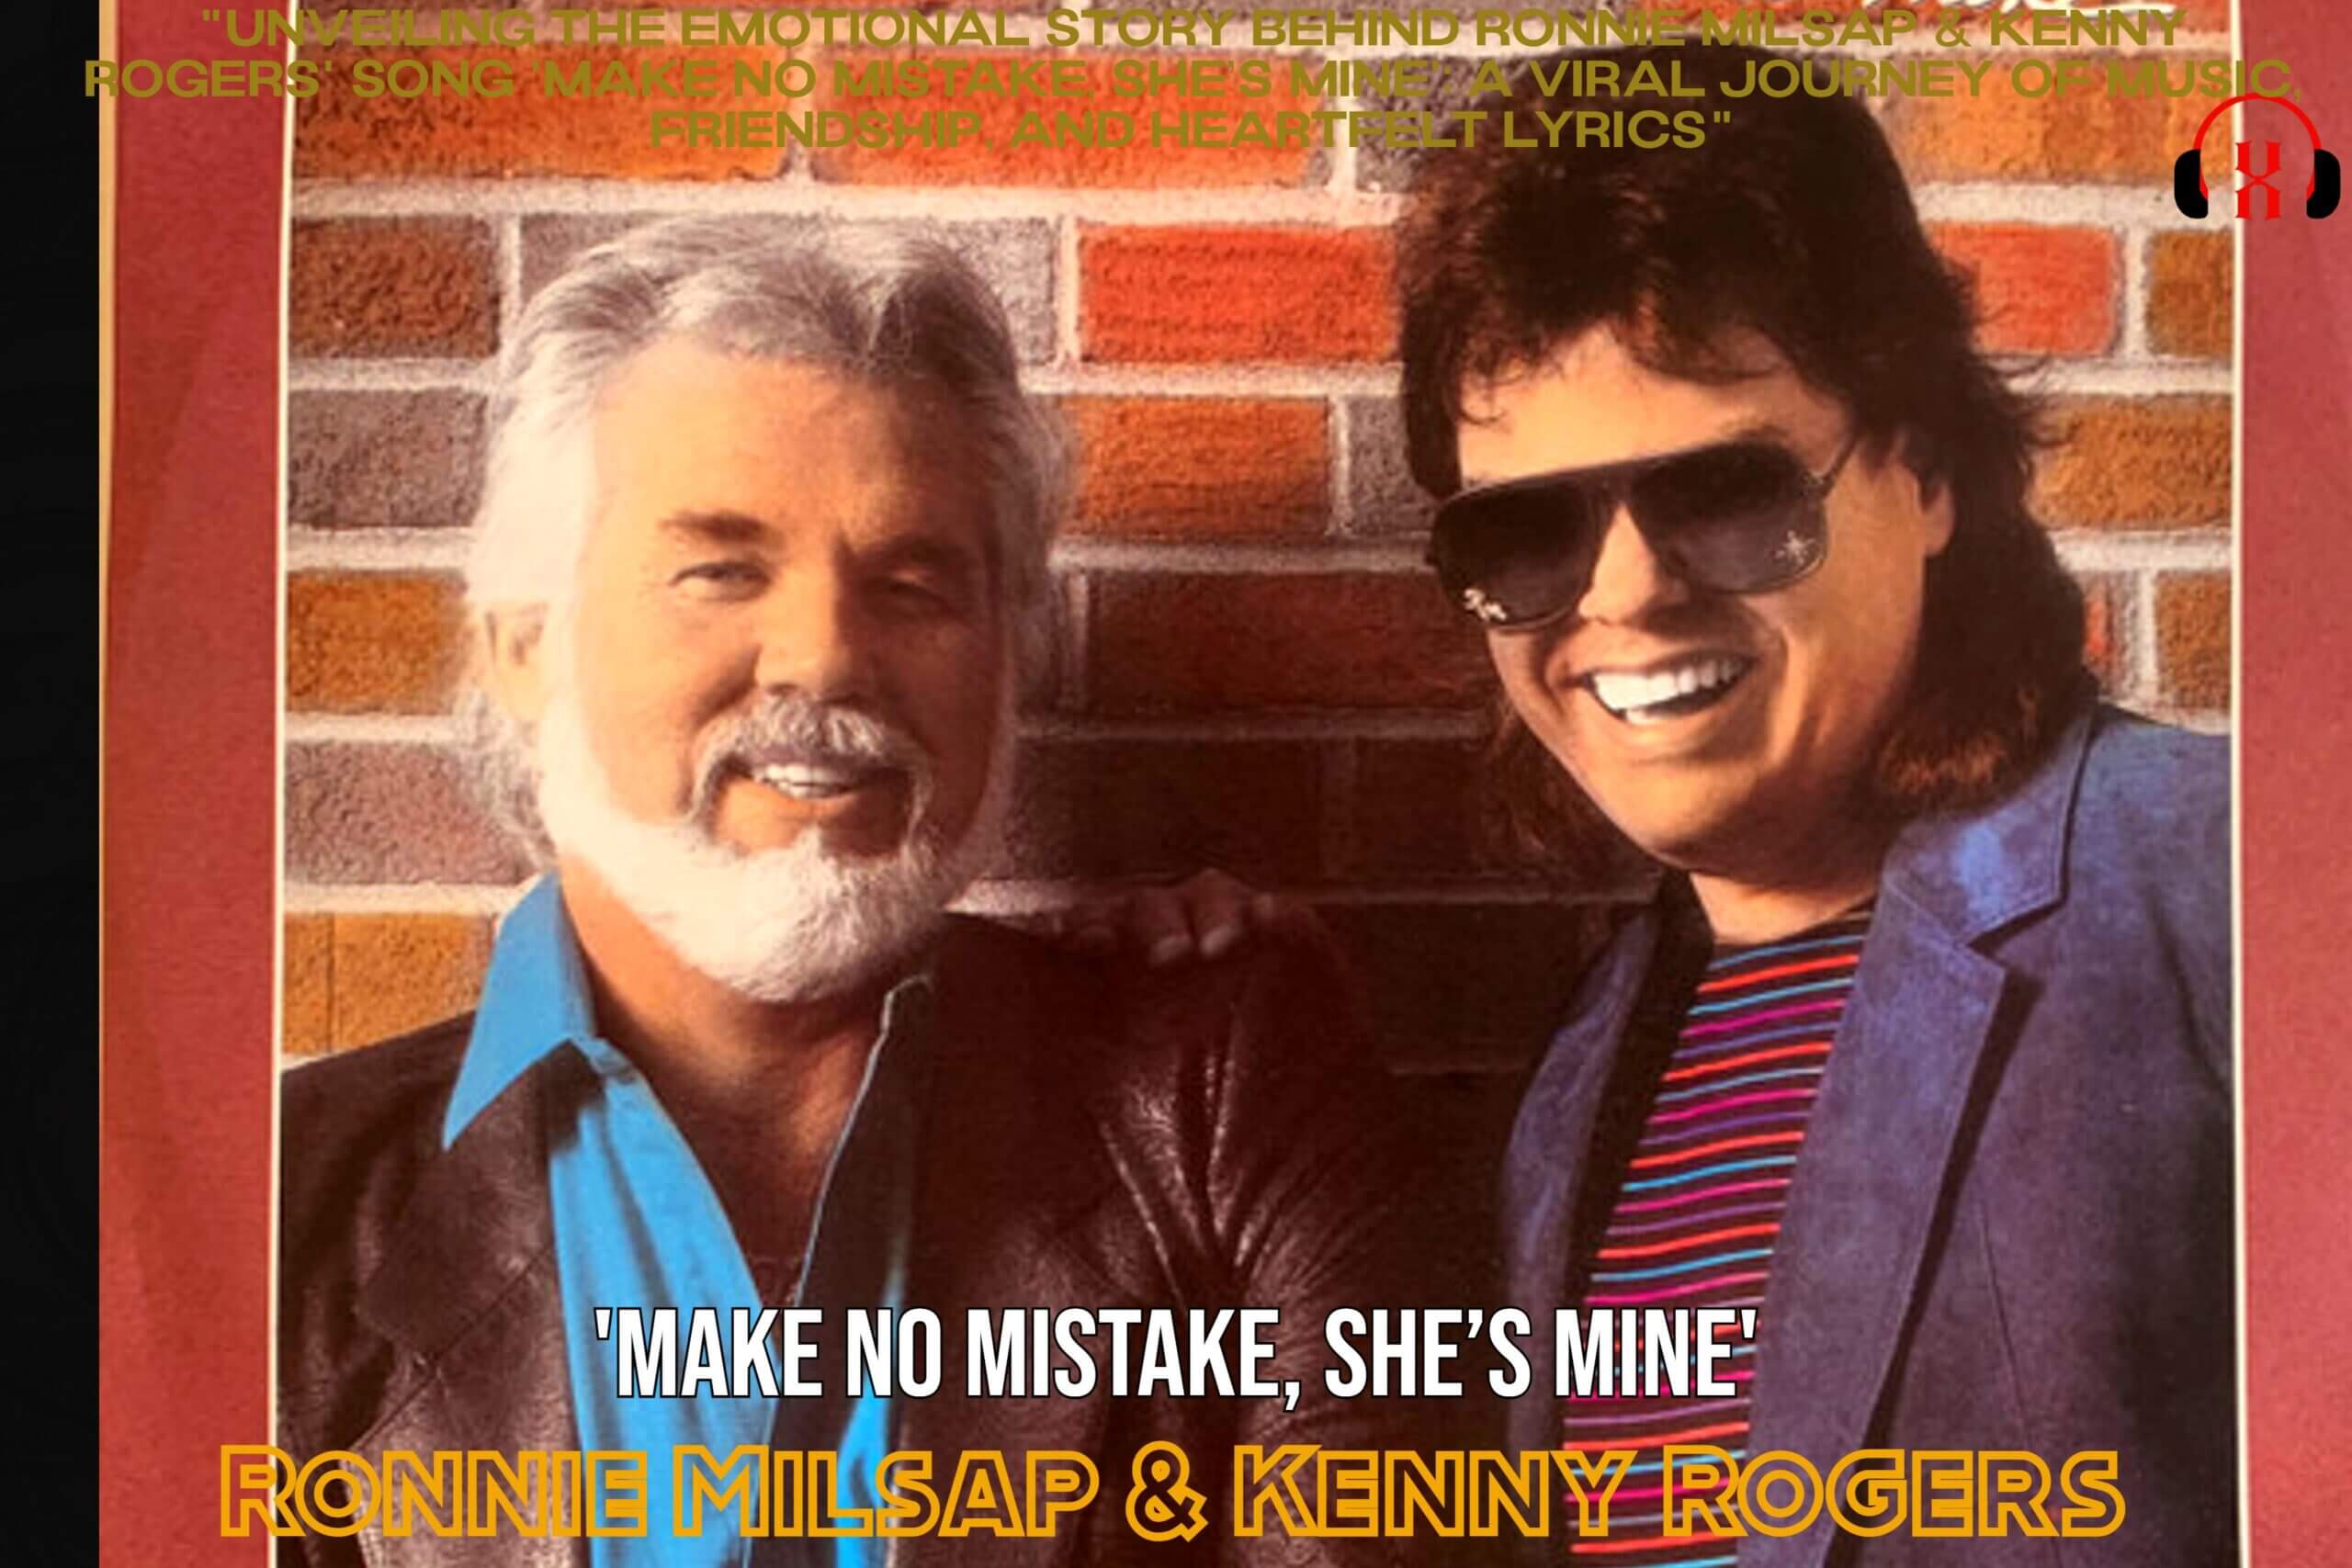 “Unveiling the Emotional Story Behind Ronnie Milsap & Kenny Rogers’ Song ‘Make No Mistake, She’s Mine’: A Viral Journey of Music, Friendship, and Heartfelt Lyrics”